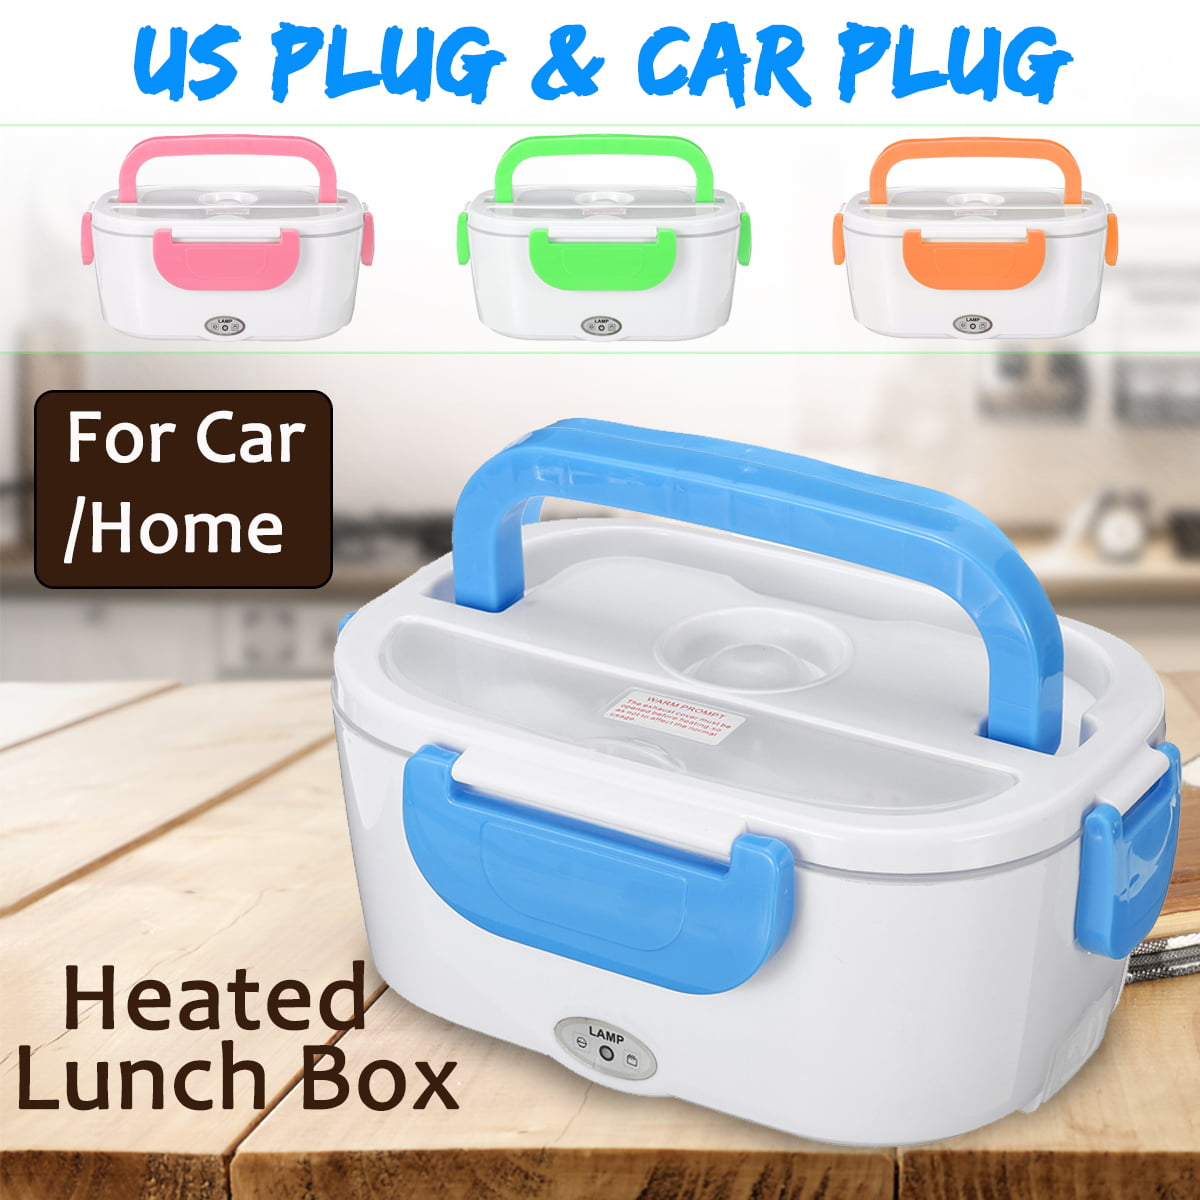 Portable Electric Heated Heating Lunch Box Bento Travel Food Warmer Container UK